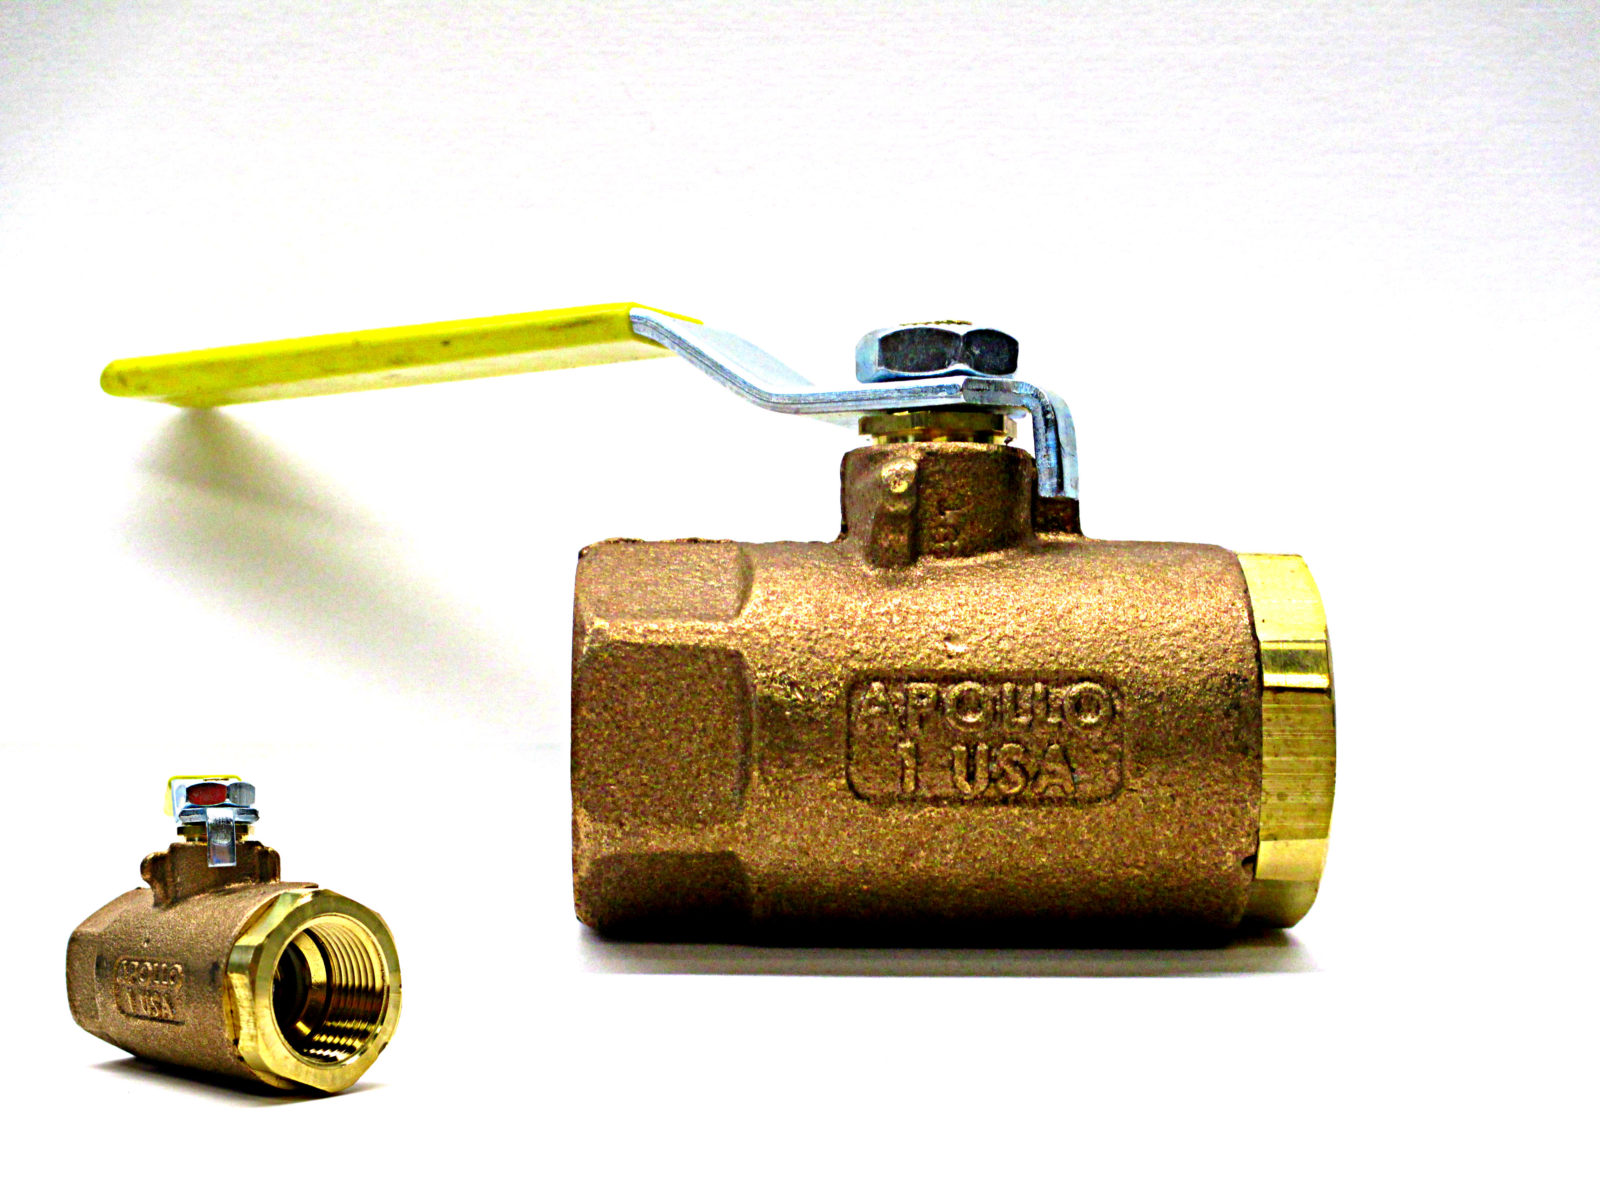 A Water Shut-Off Valve: Its Importance and Locations 